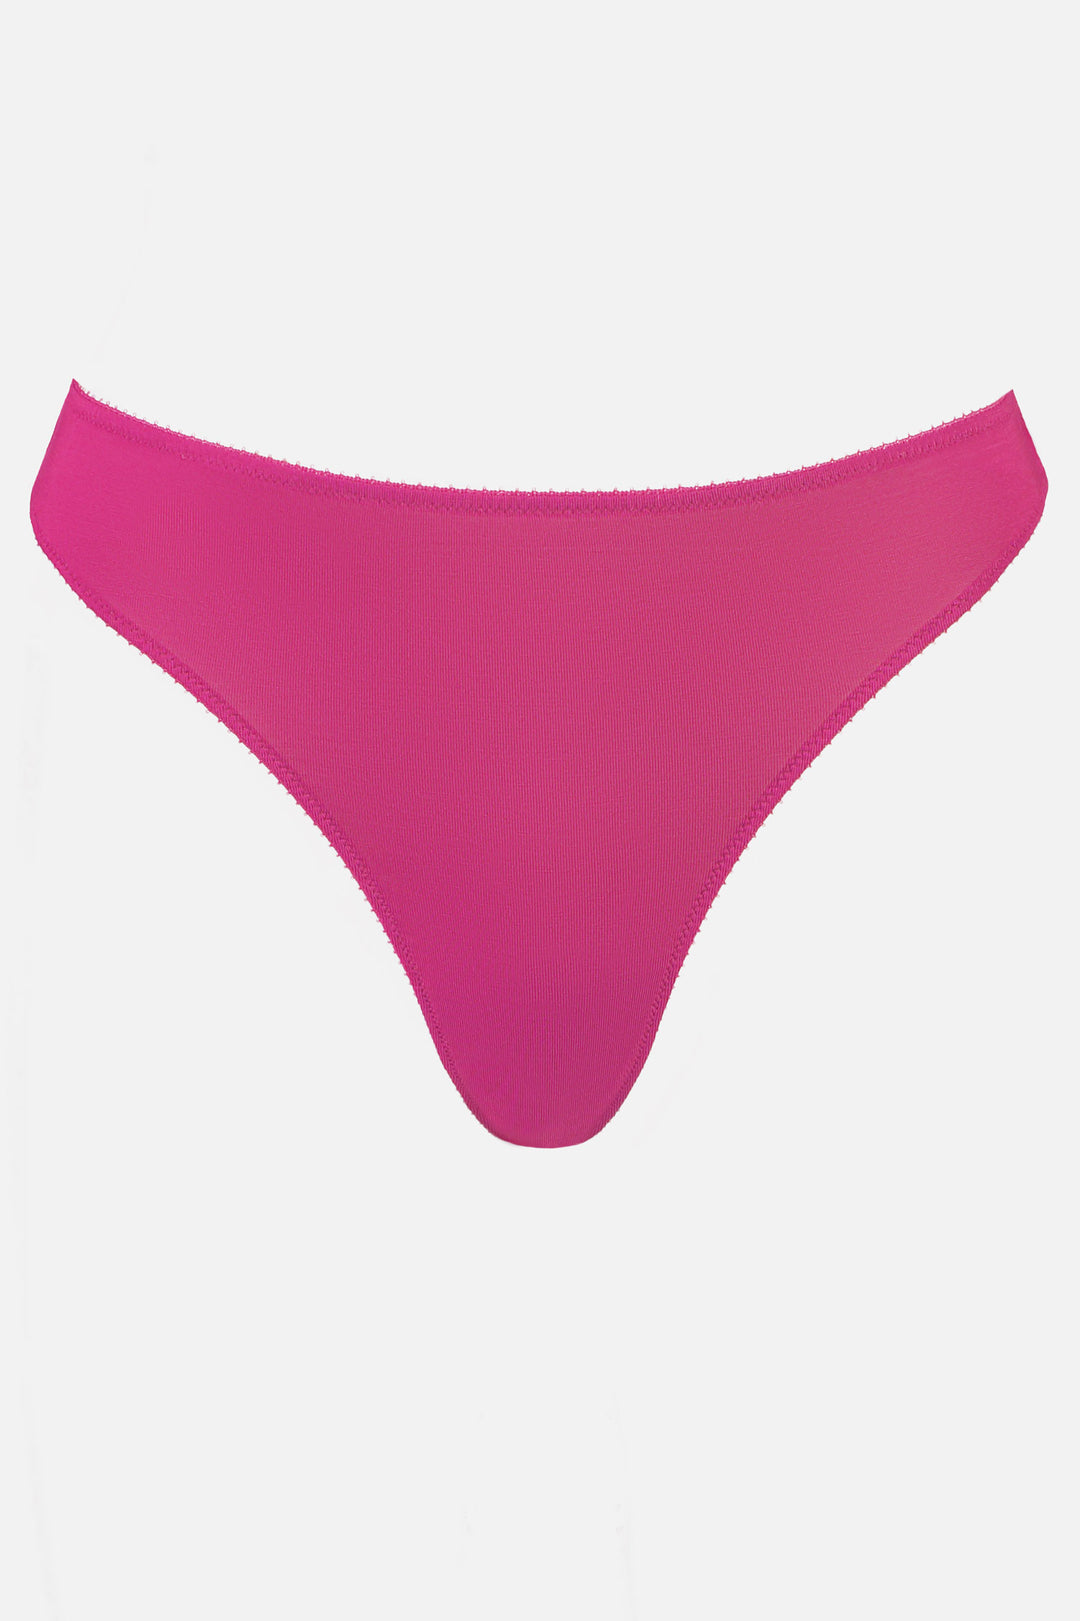 Videris Lingerie thong in bohemian magenta TENCEL™ a comfortable mid-rise style cut to follow the natural curve of your hips